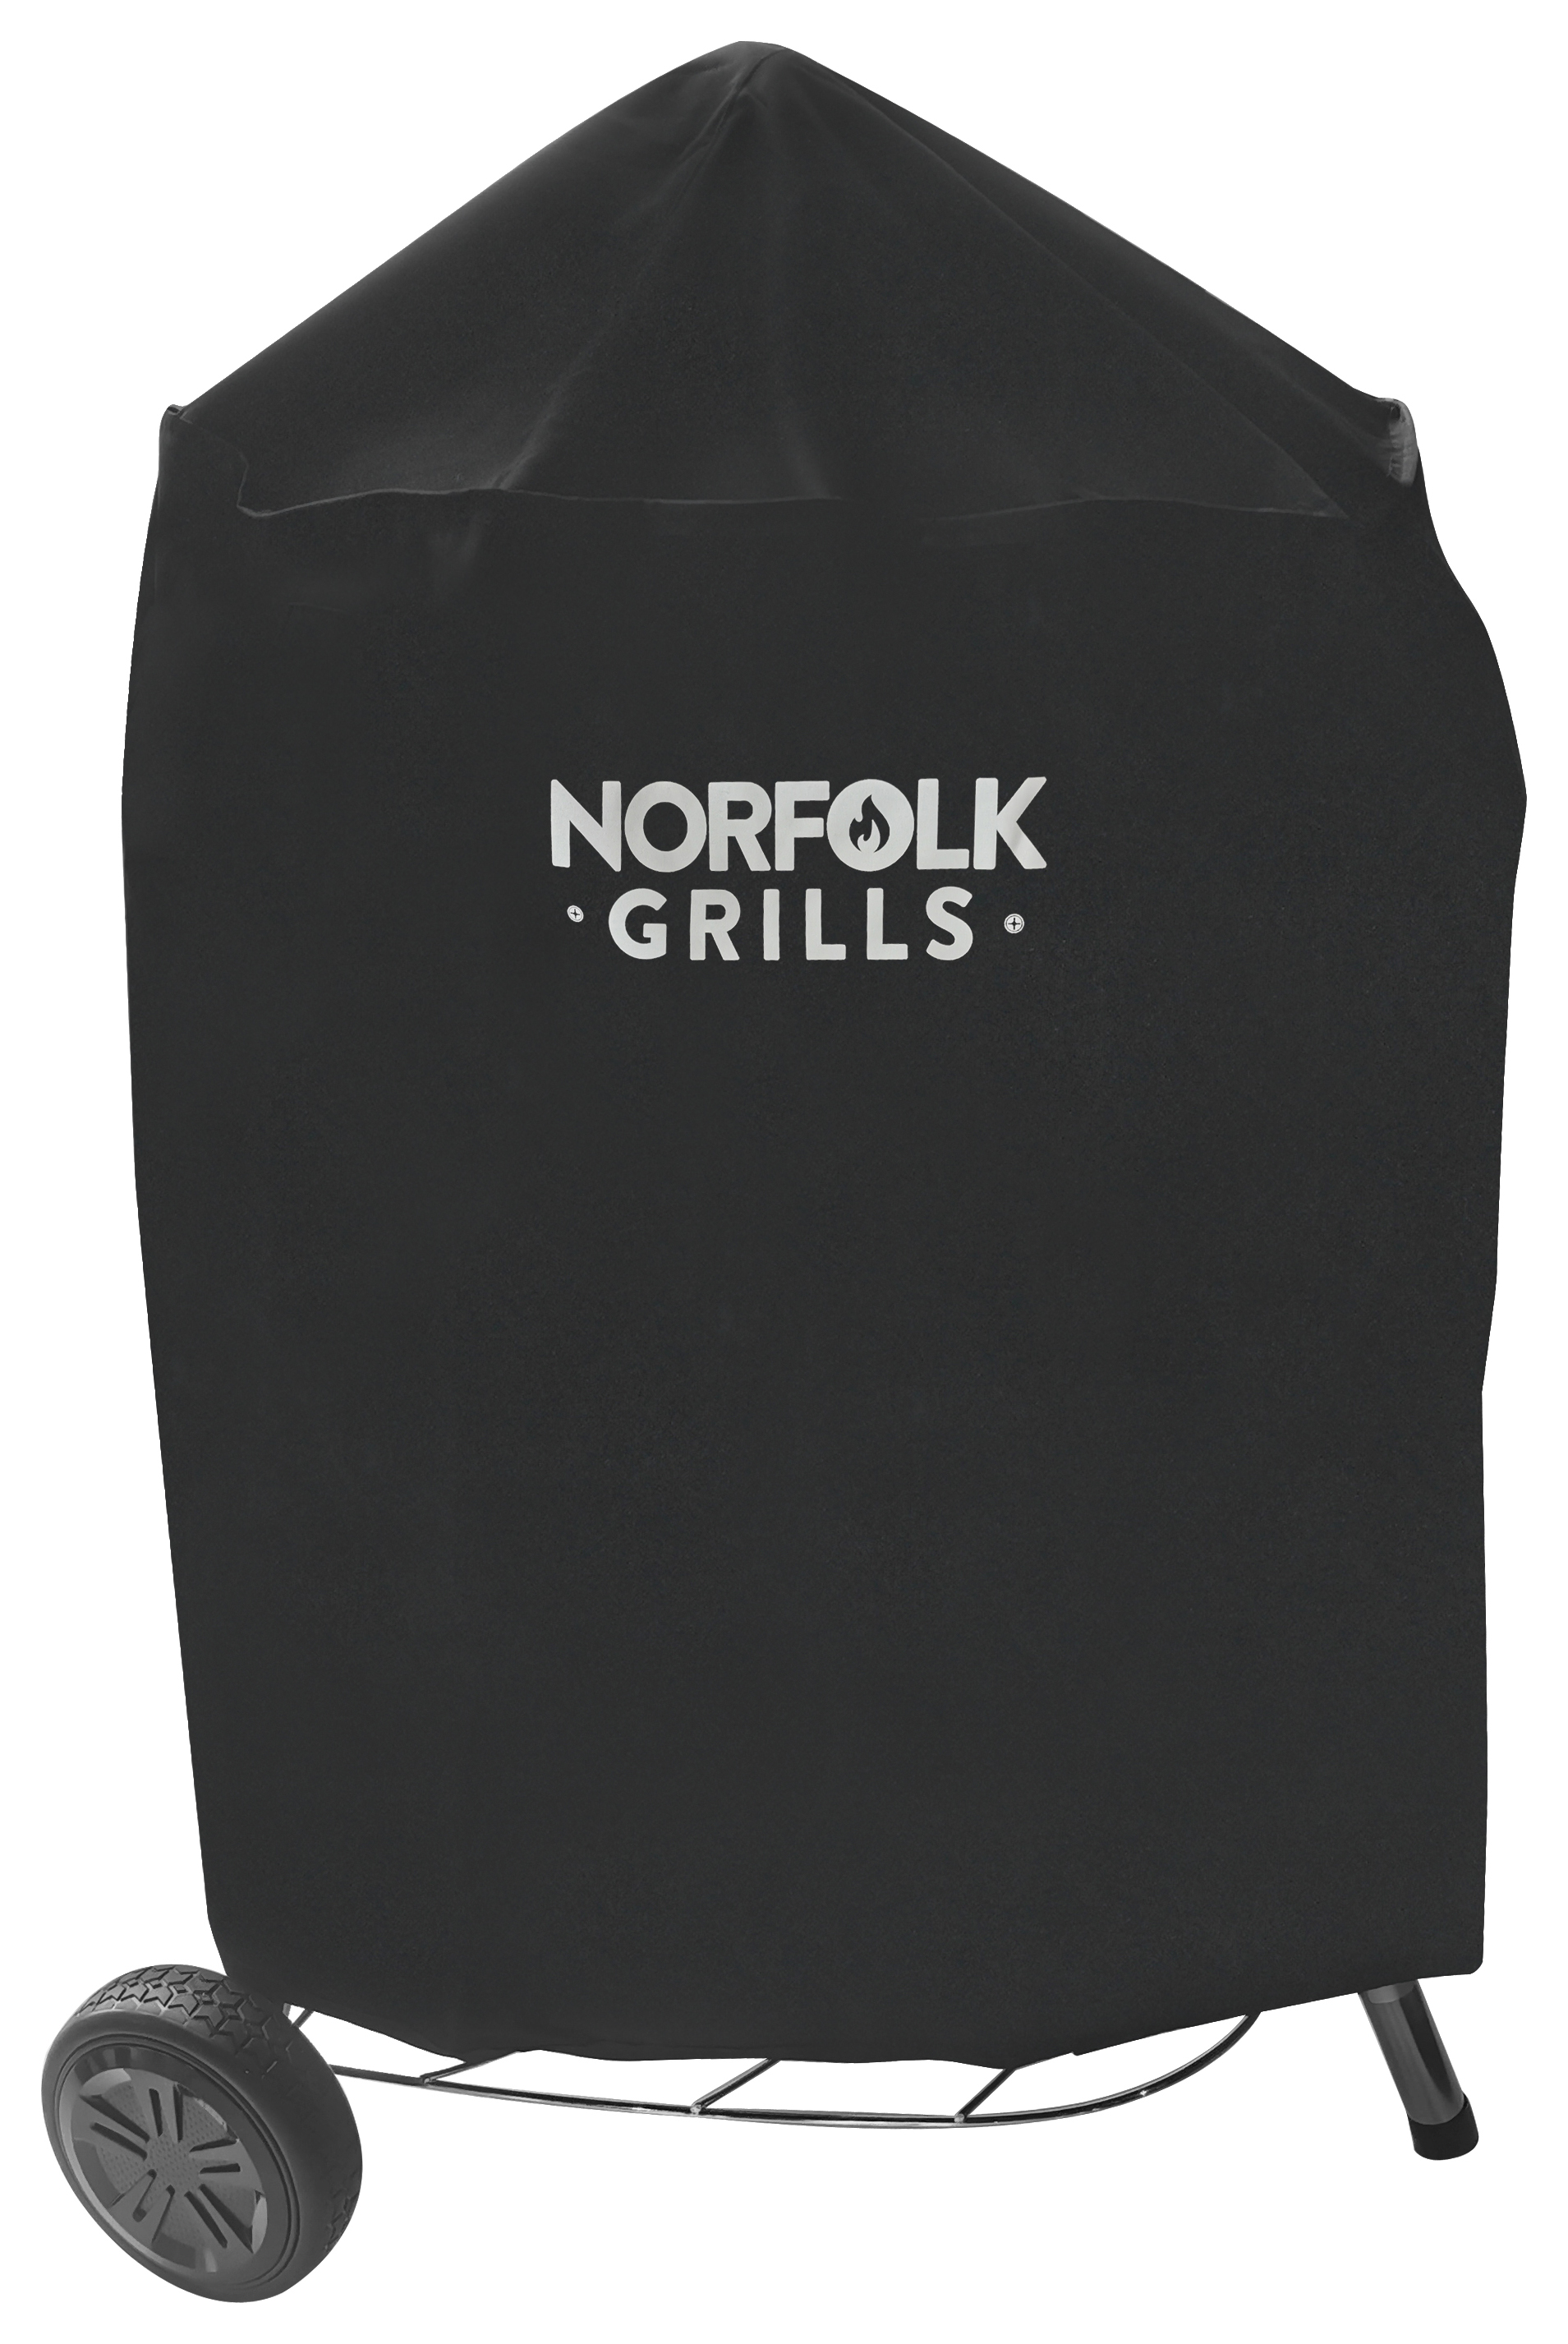 Norfolk Grills Corus Charcoal Cover